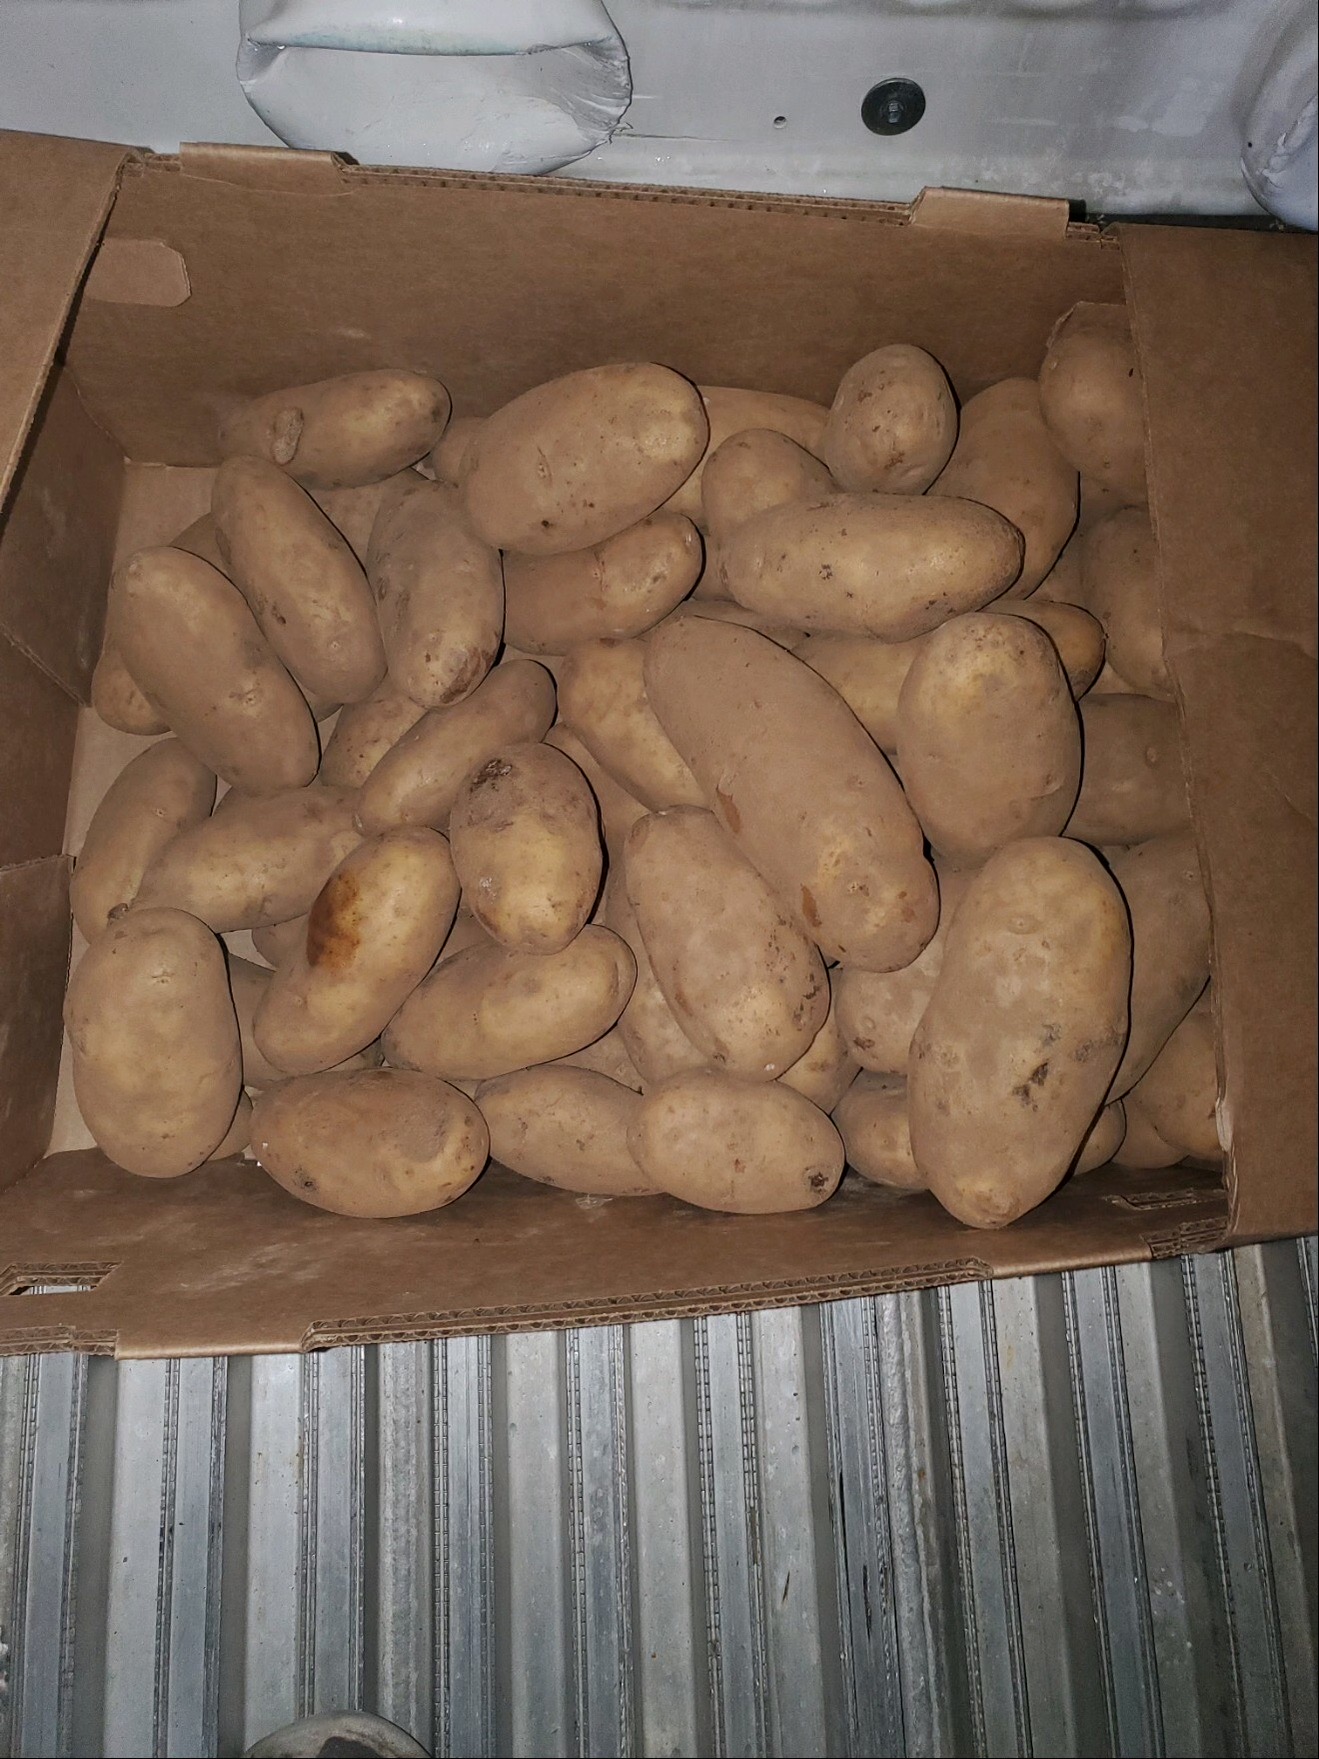 Pallet of Potatoes at front of truck